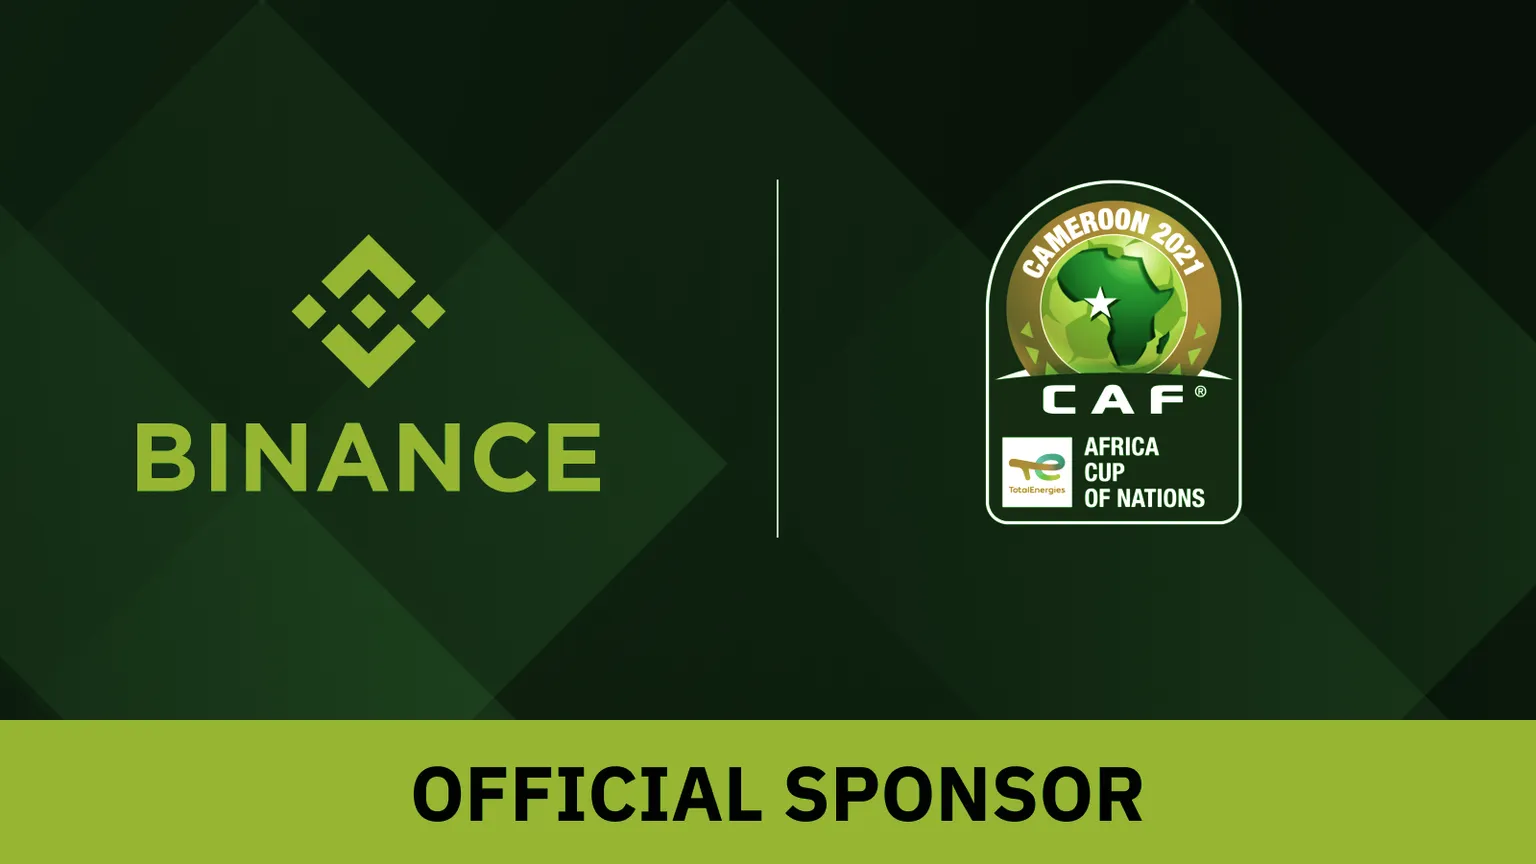 Binance becomes the official sponsor of AFCON. Image: Confederation of African Football